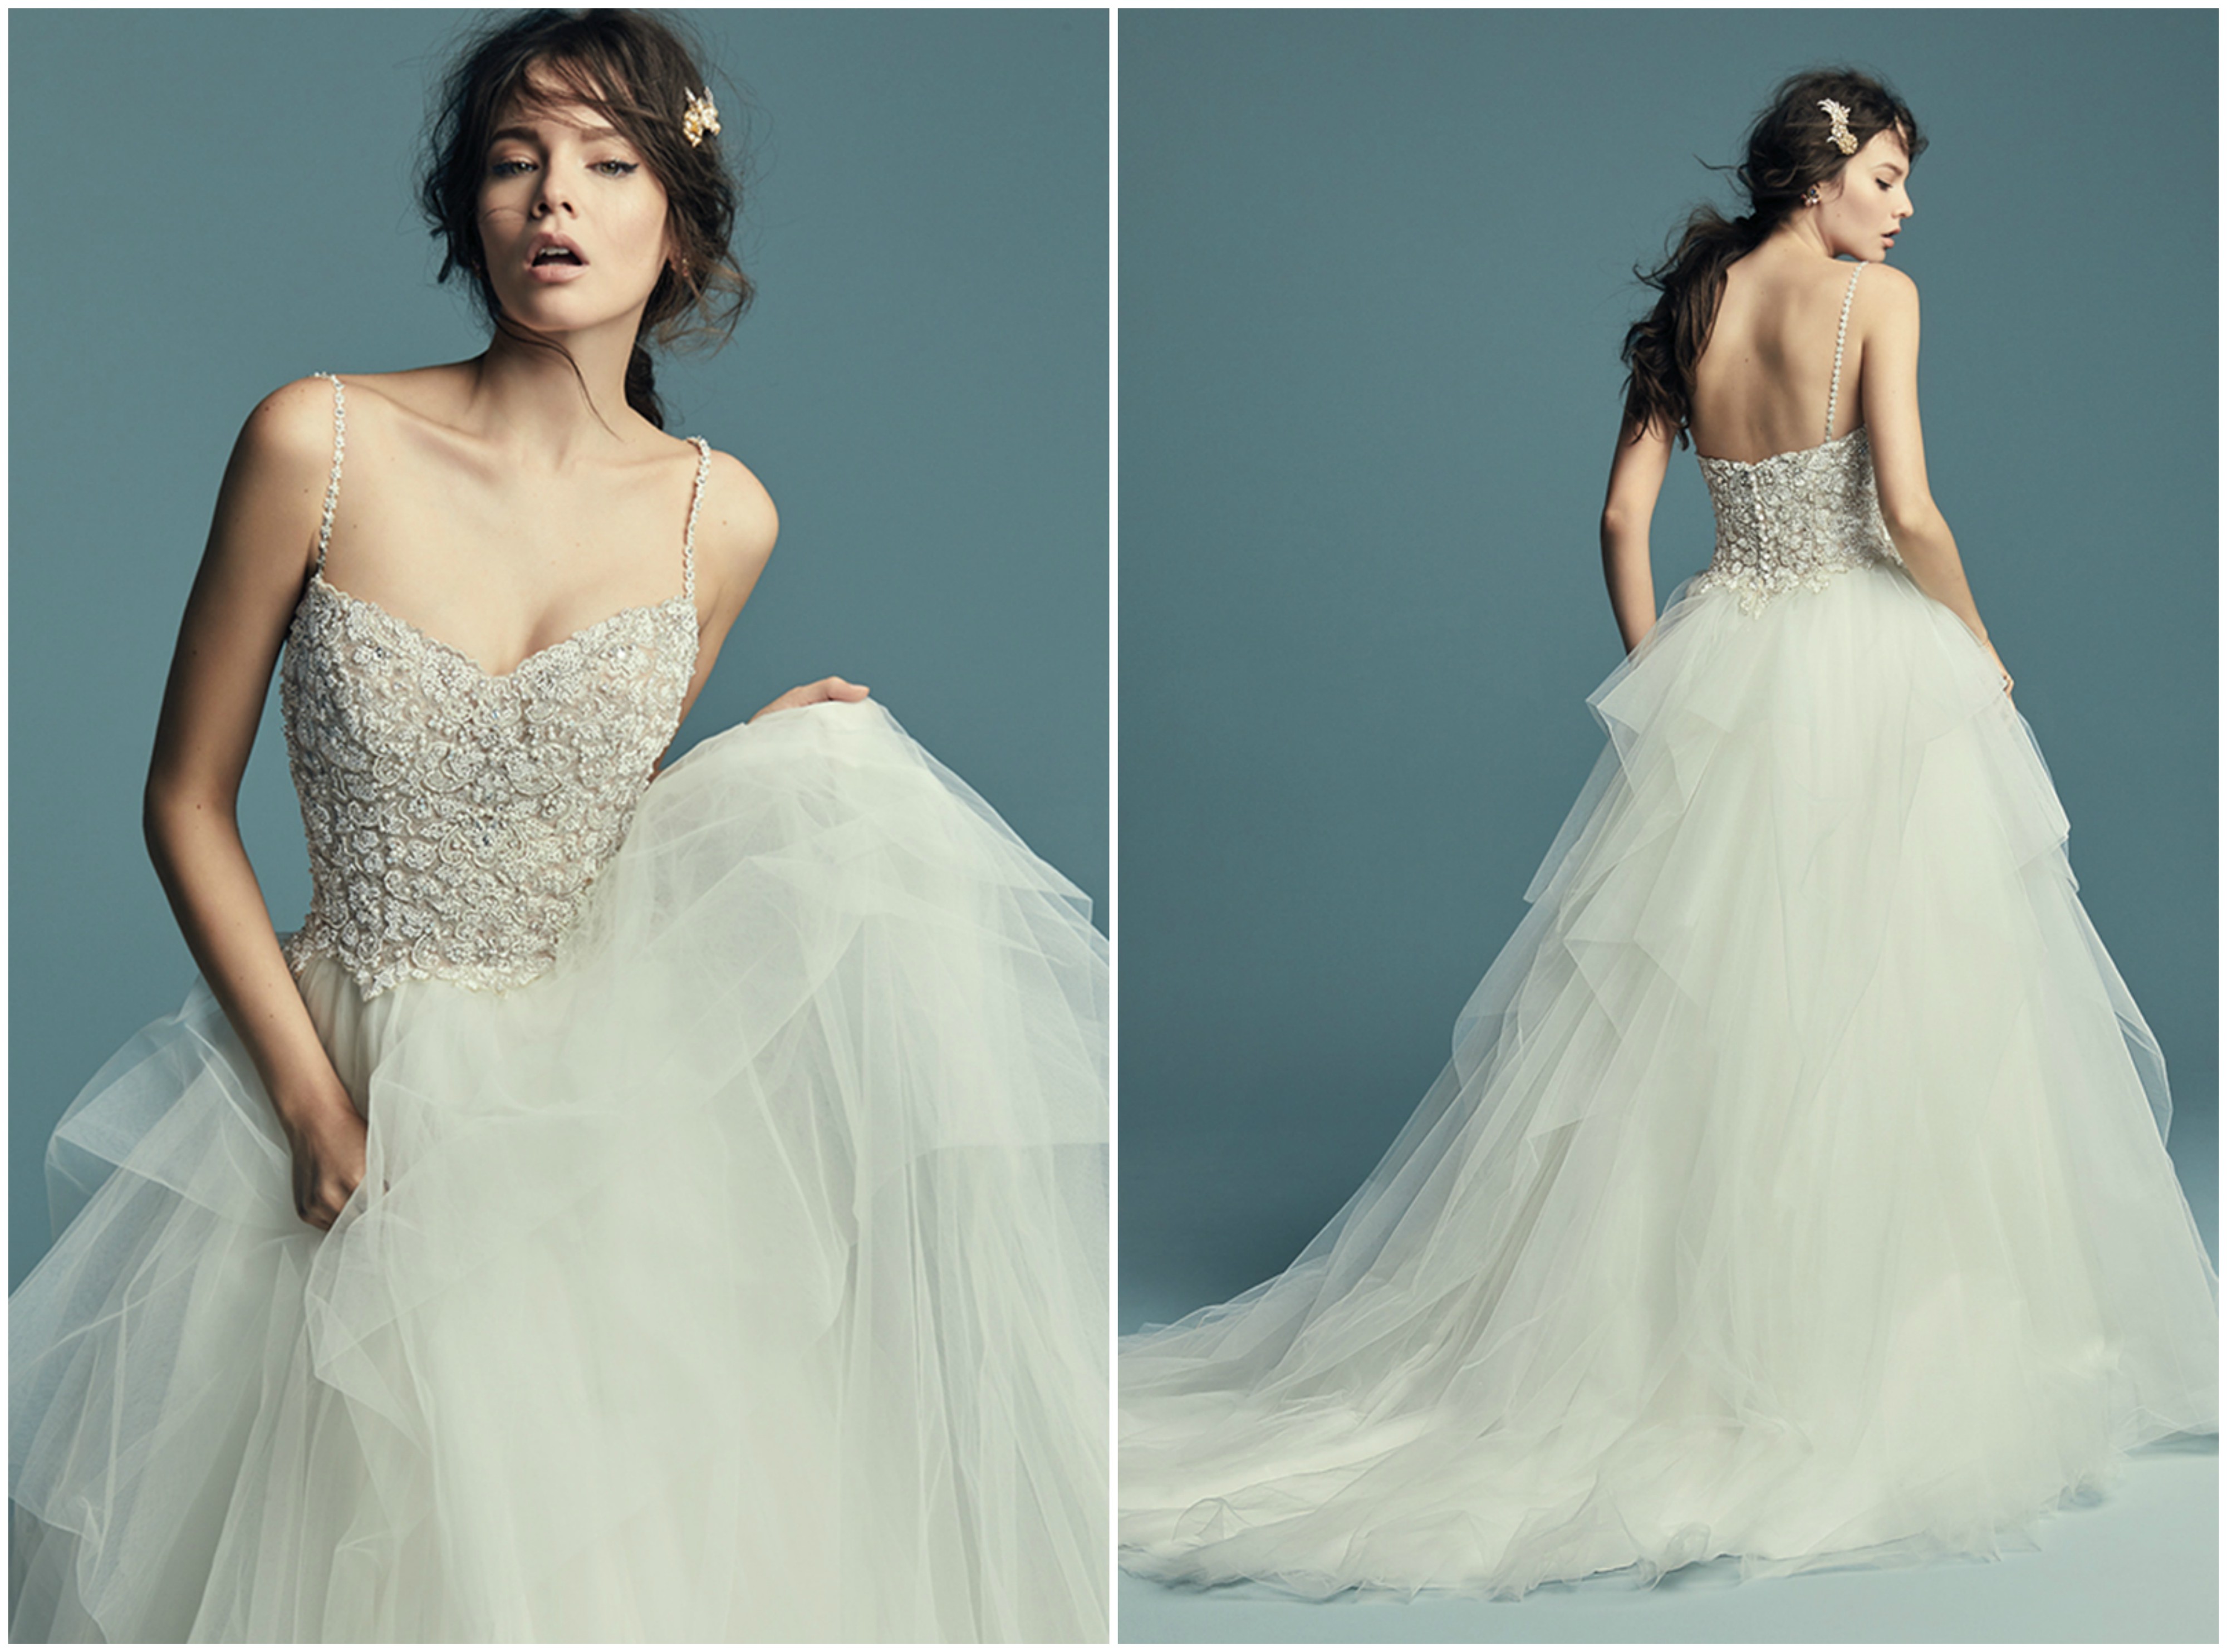 <a href="https://www.maggiesottero.com/maggie-sottero/shauna/11505" target="_blank">Maggie Sottero</a>